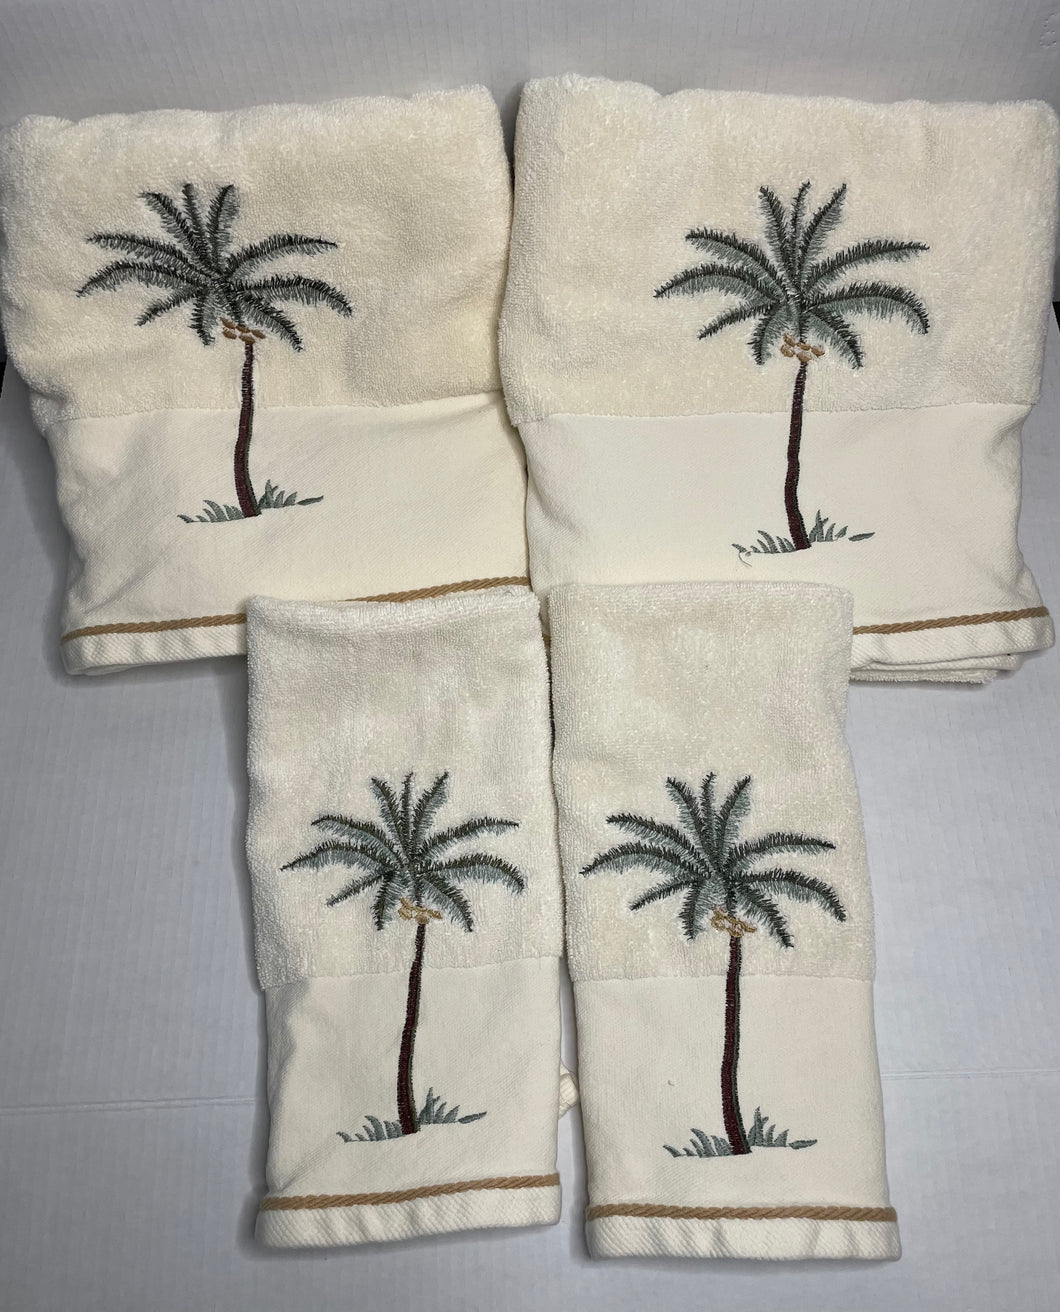 🌴Palm tree towels 2 large & 2 small